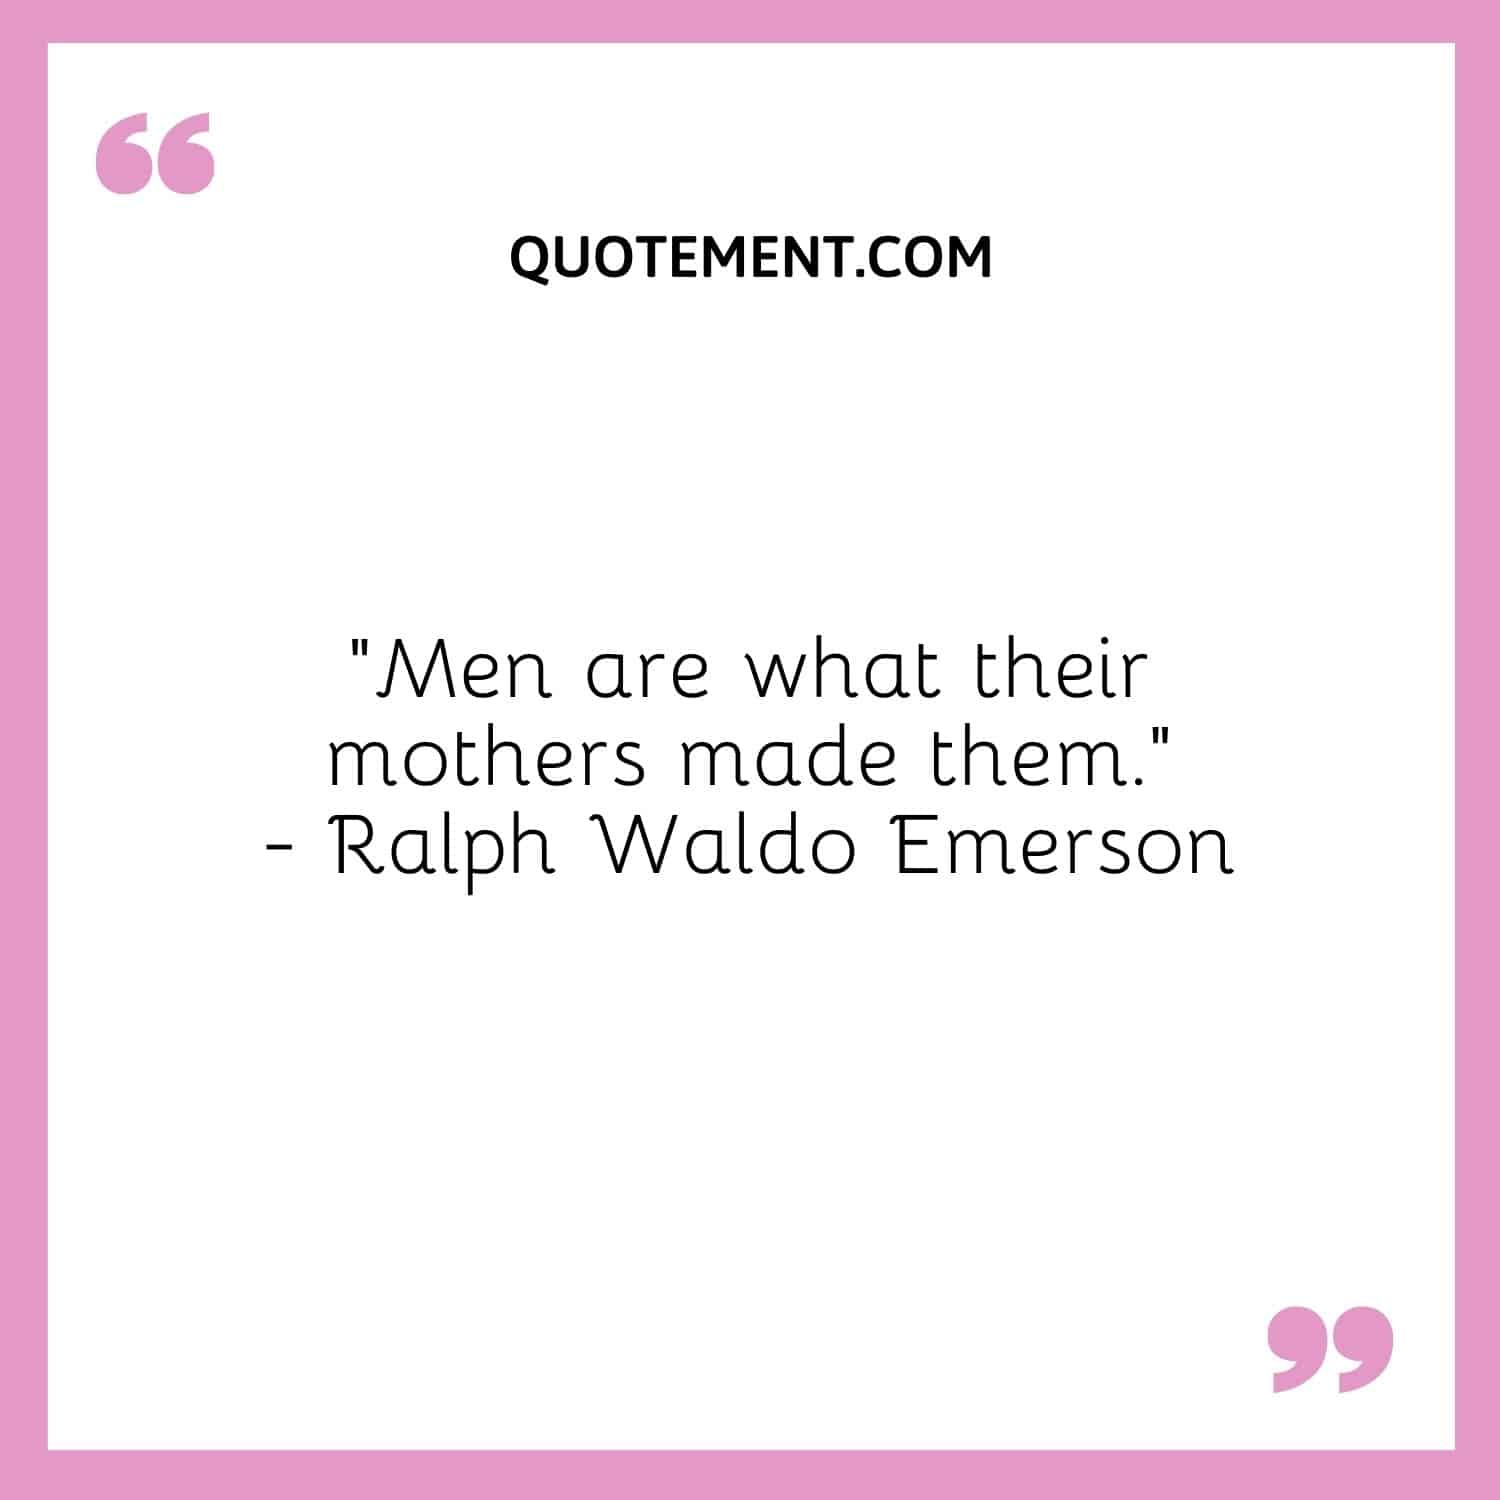 Men are what their mothers made them